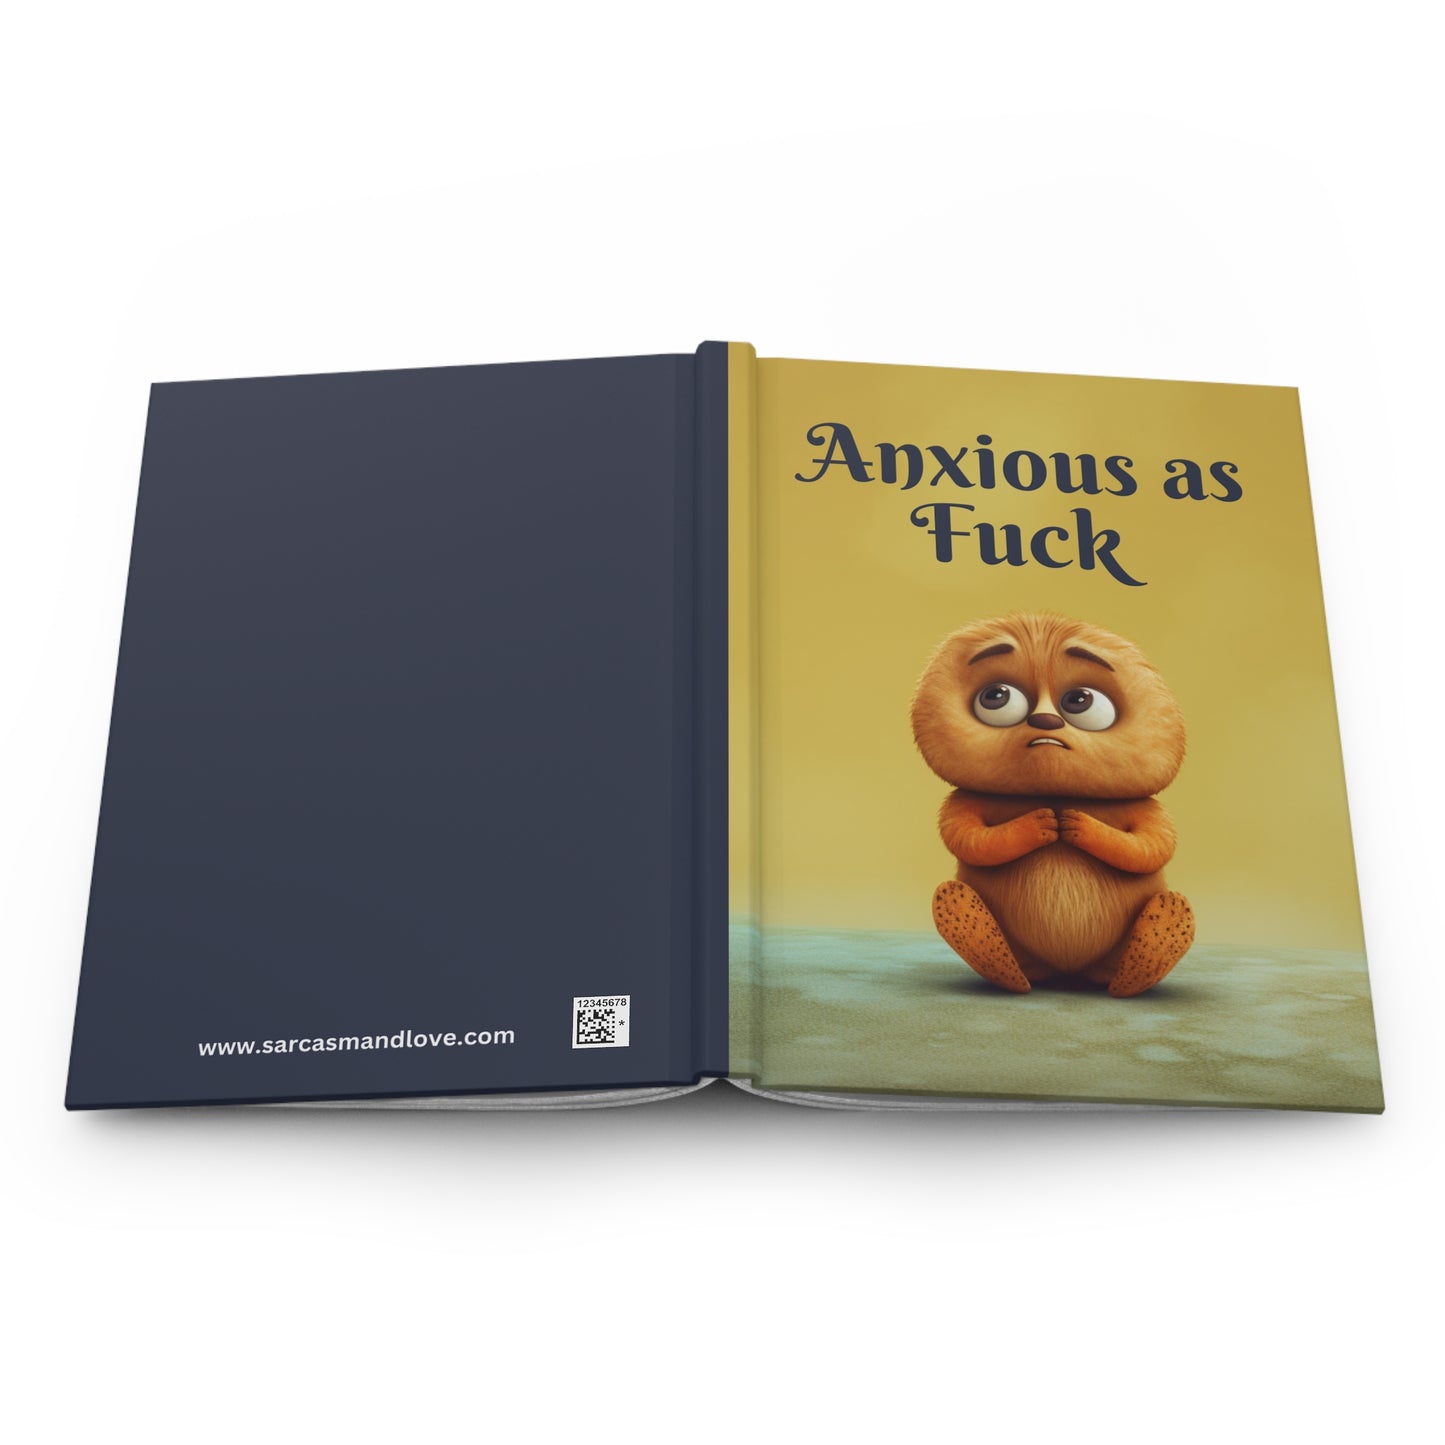 Anxious Furry Friend Hardcover Journal - Mindful Wellness Notebook for Anxiety Relief and Daily Affirmations, 5.75"x7.5" Size